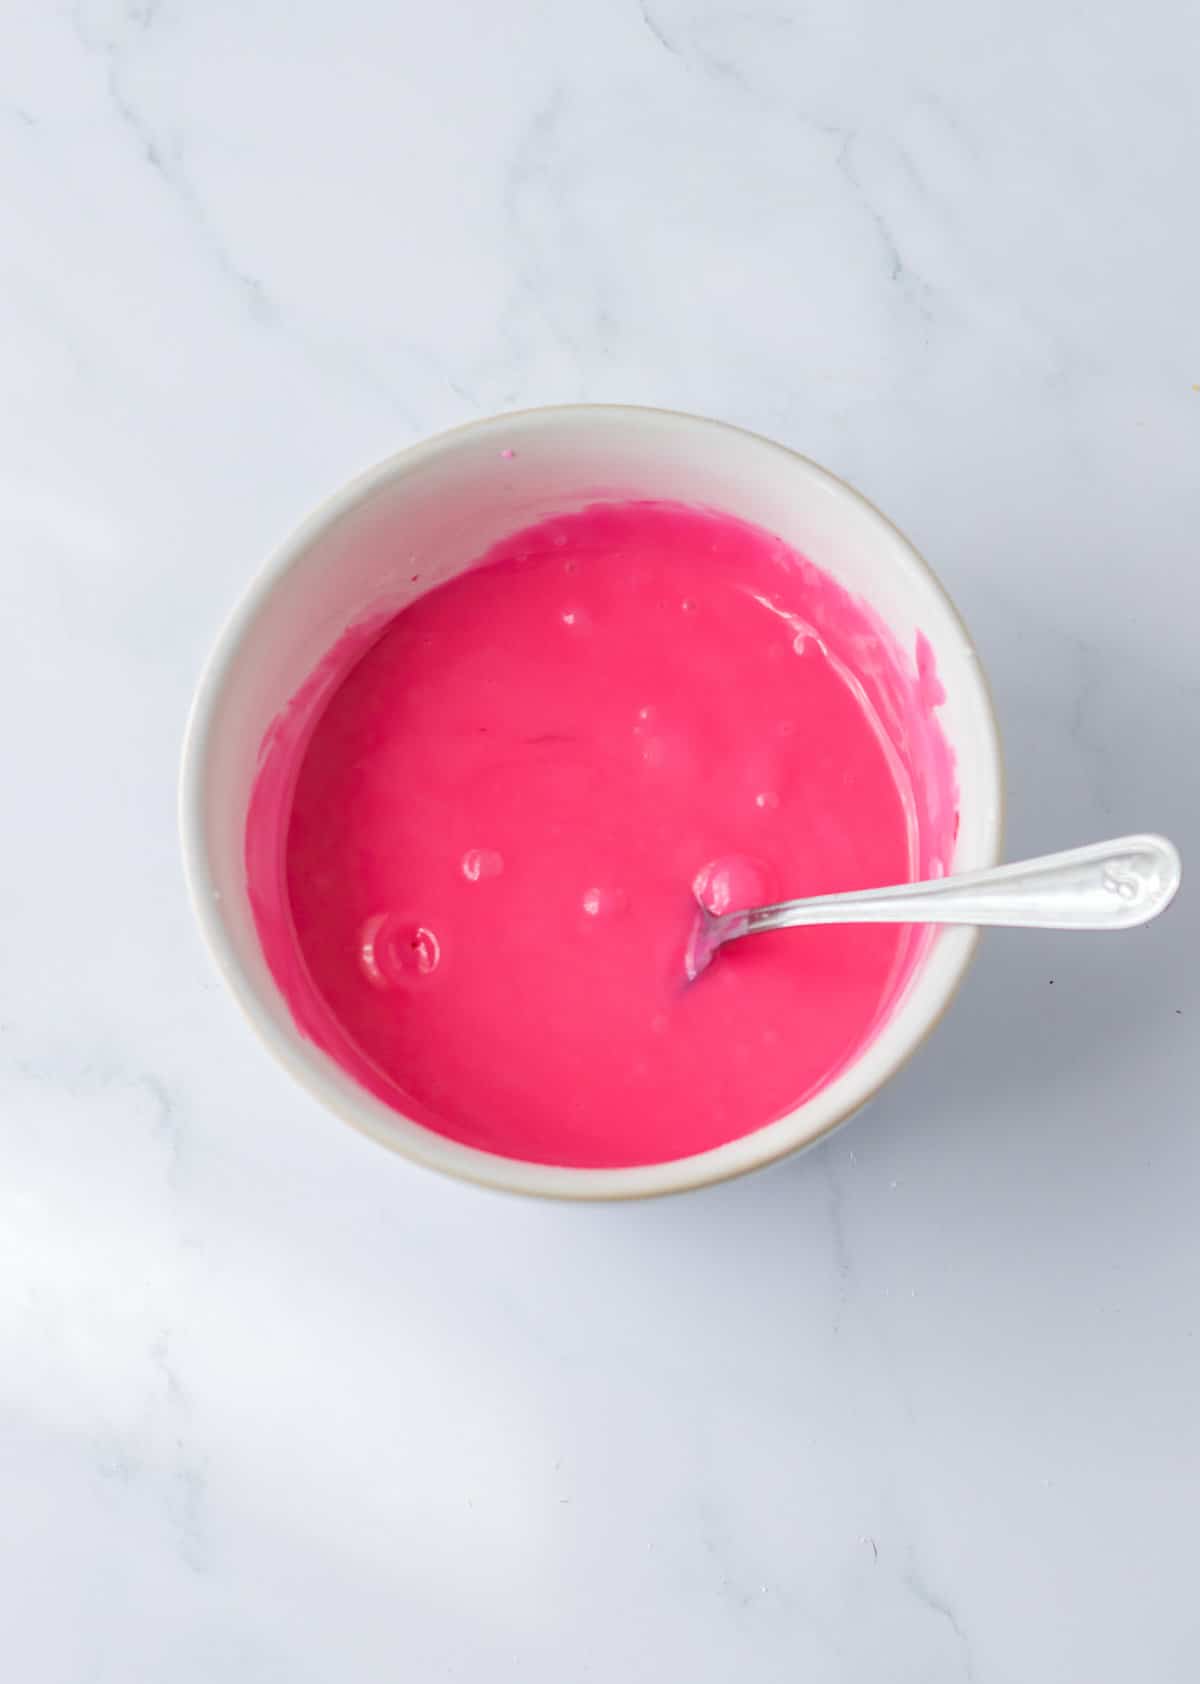 Pink icing in small bowl with spoon.